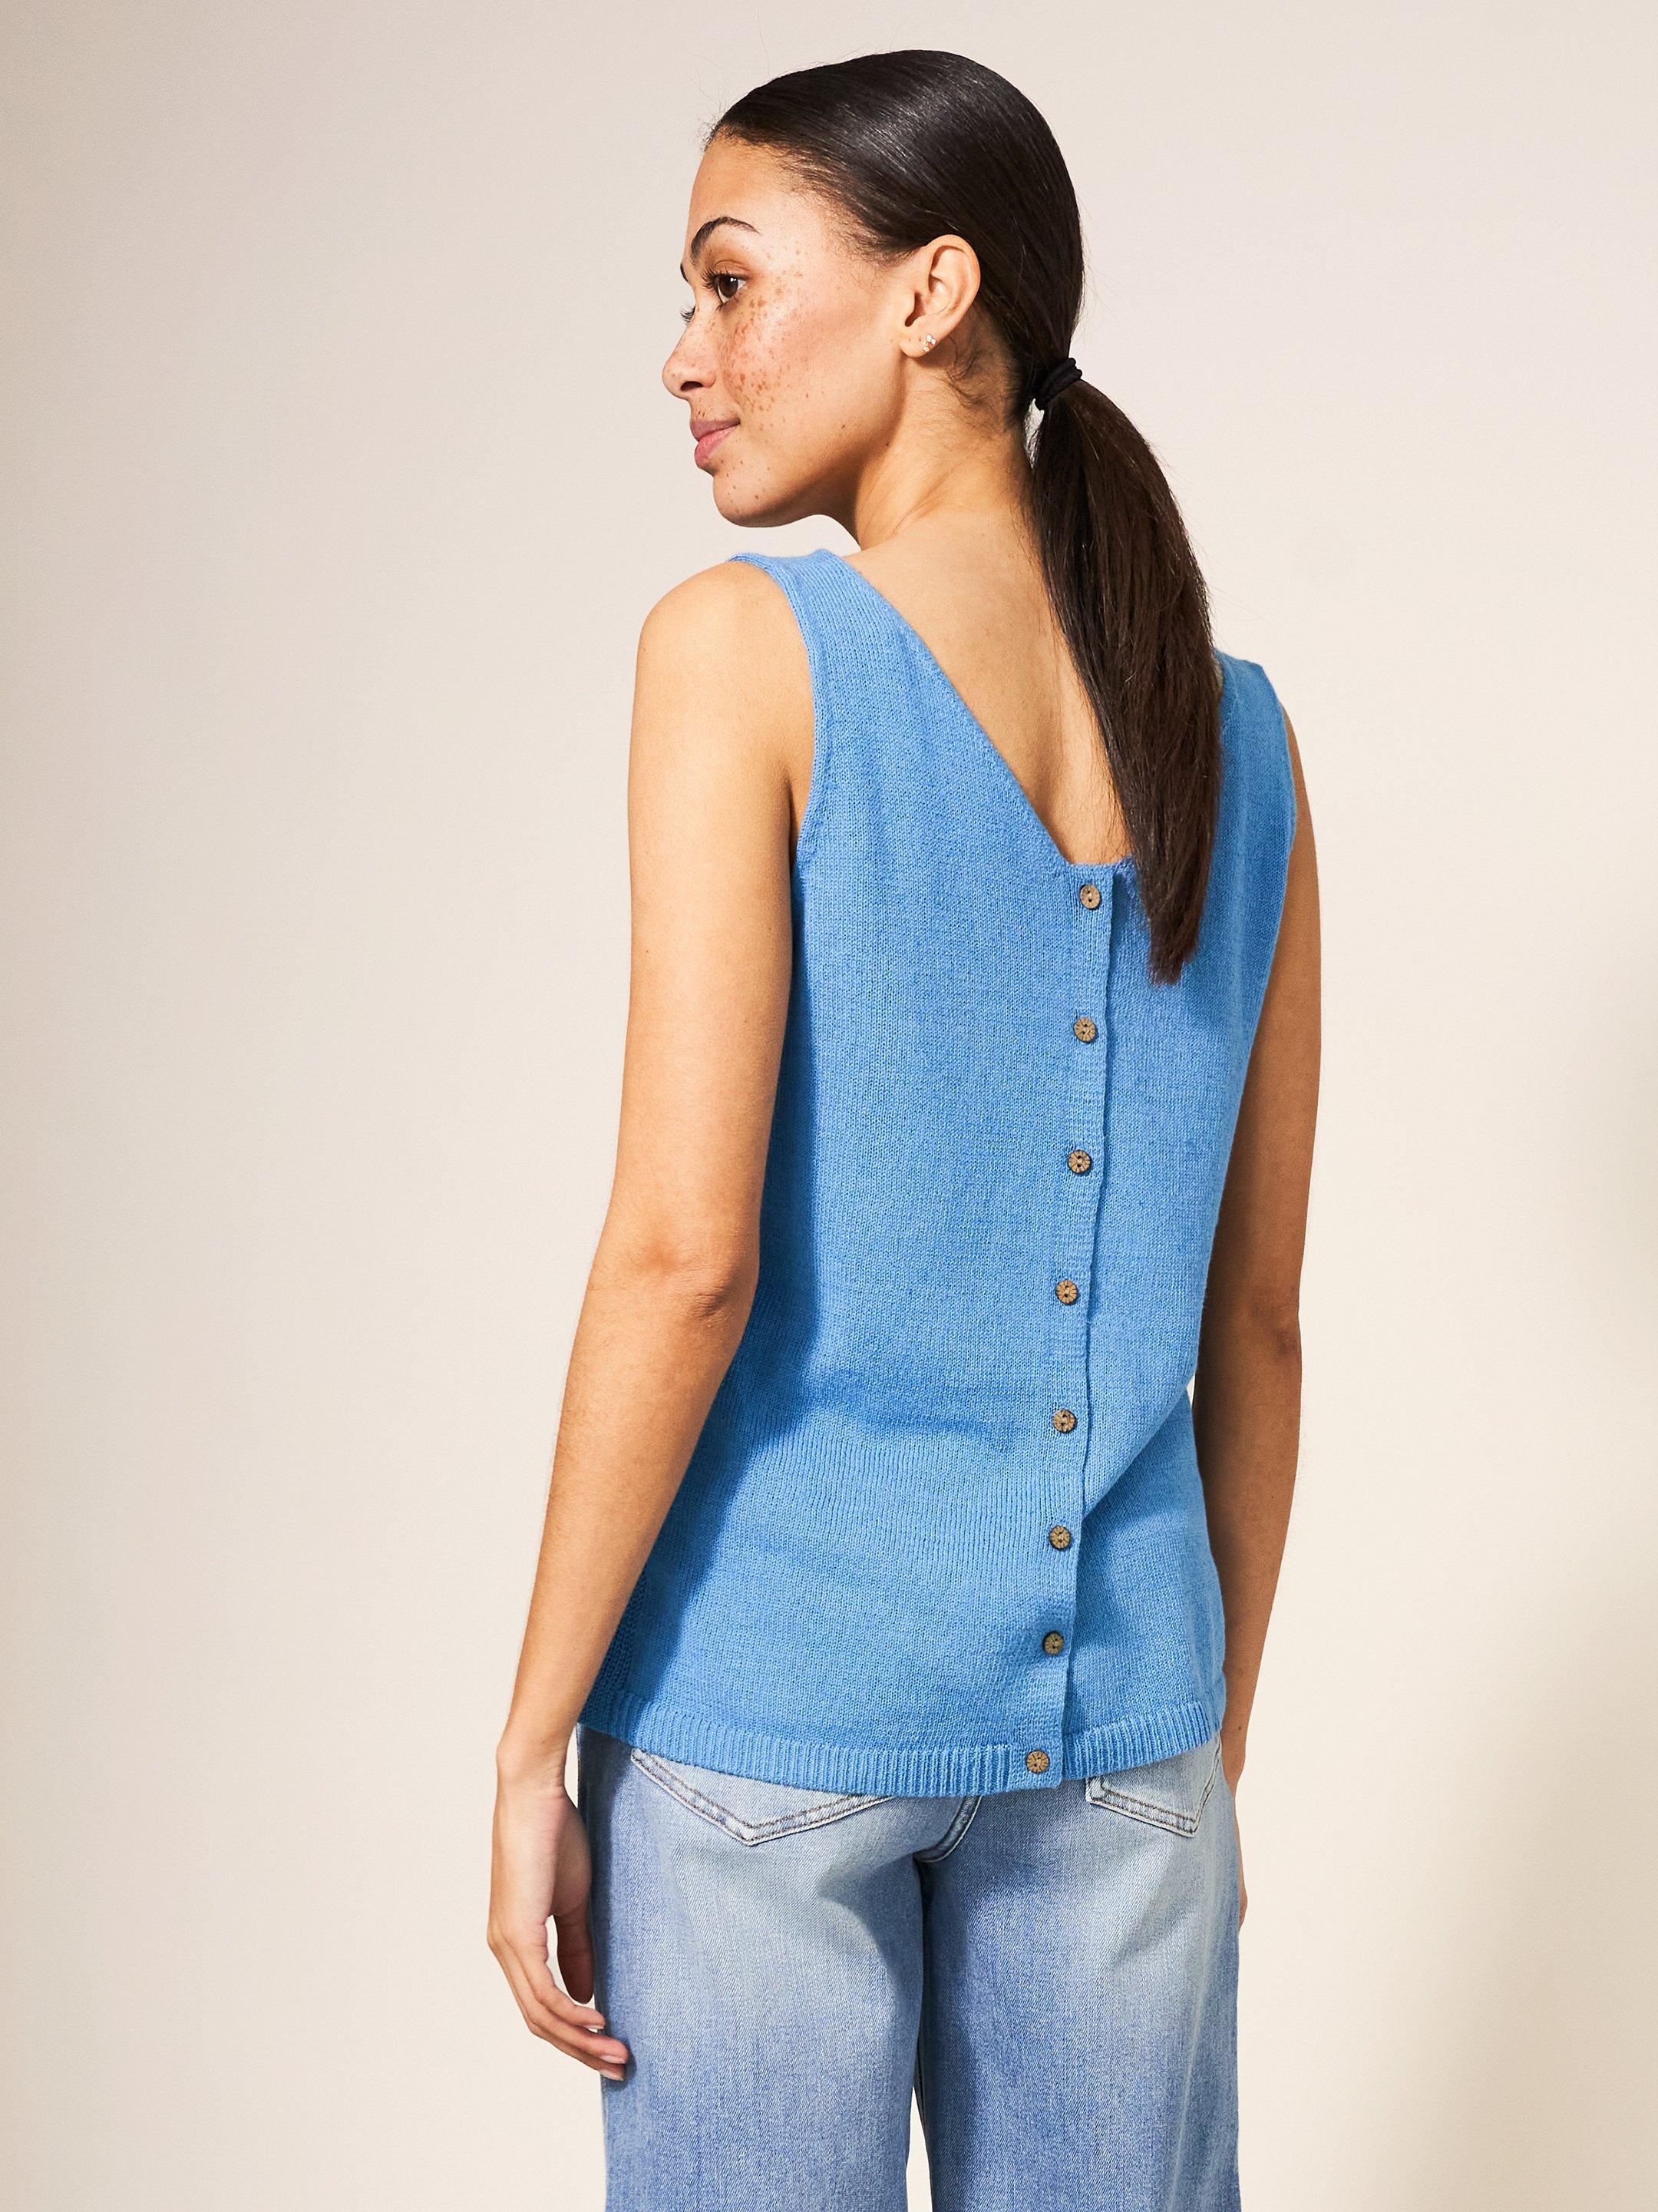 DAISY KNITTED VEST in MID BLUE - MODEL BACK